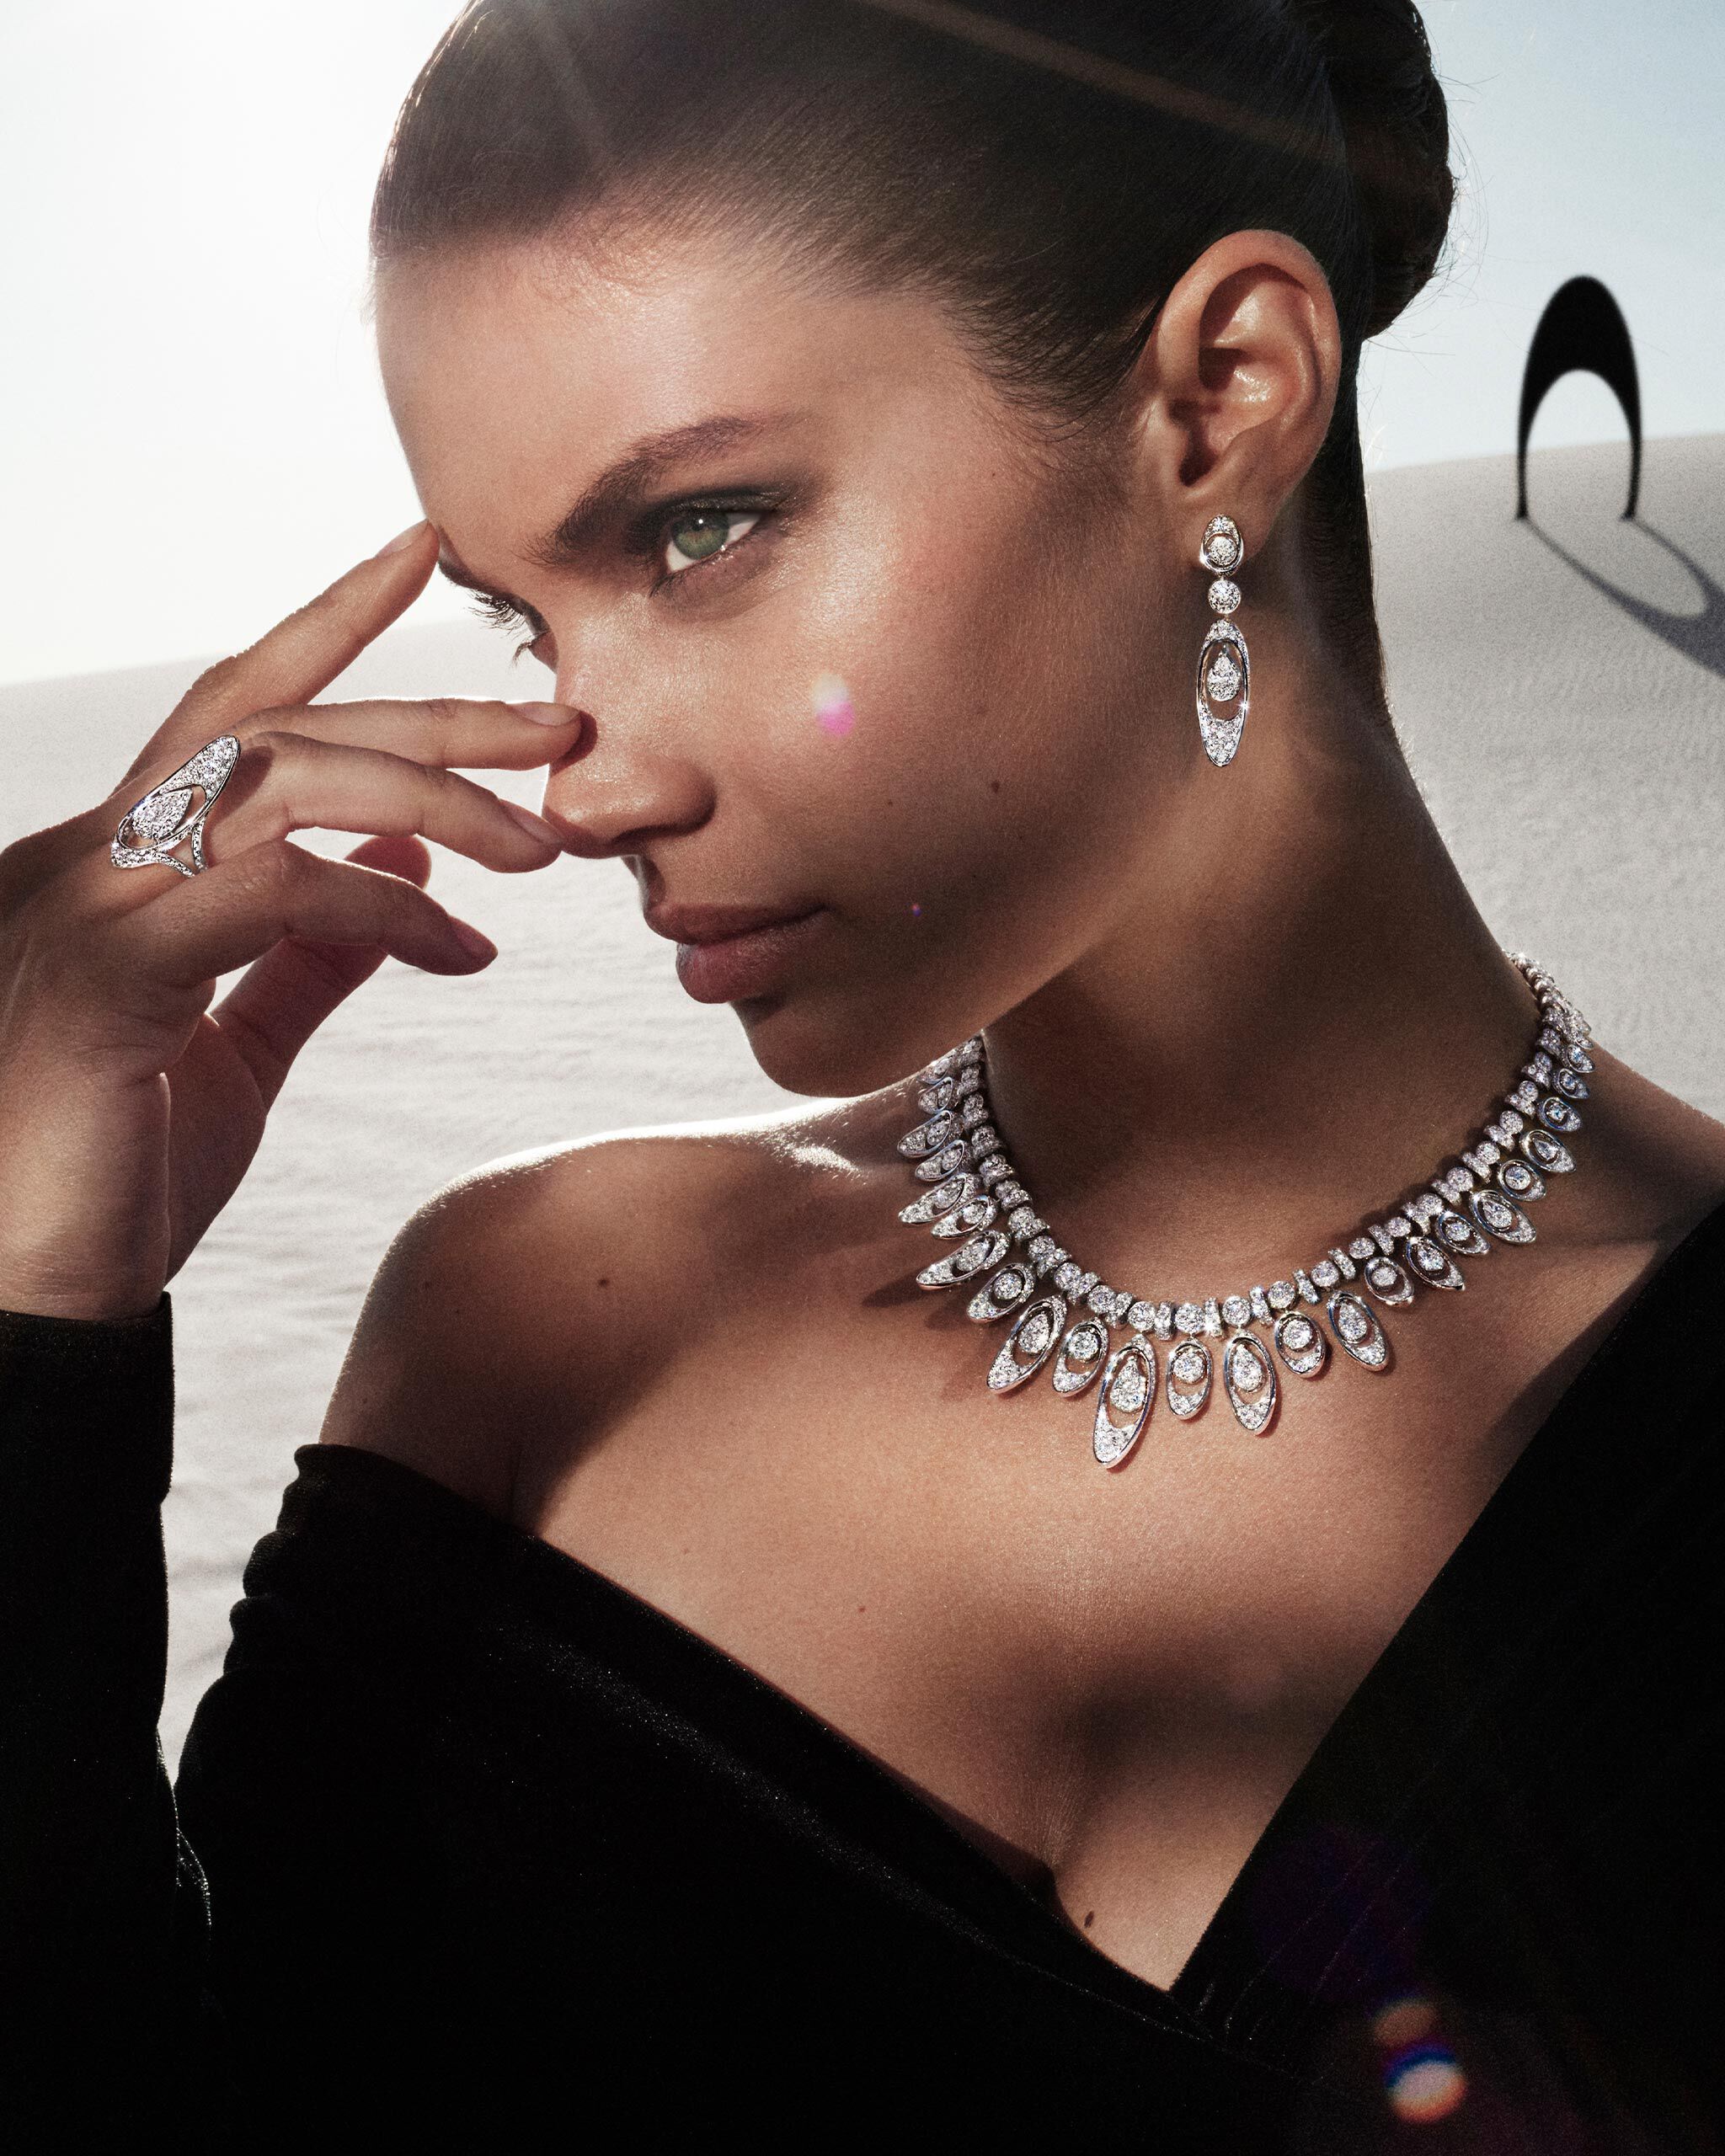 The Graff Gateway motif is transformed into a dramatic diamond fringe on a sensational necklace and earrings